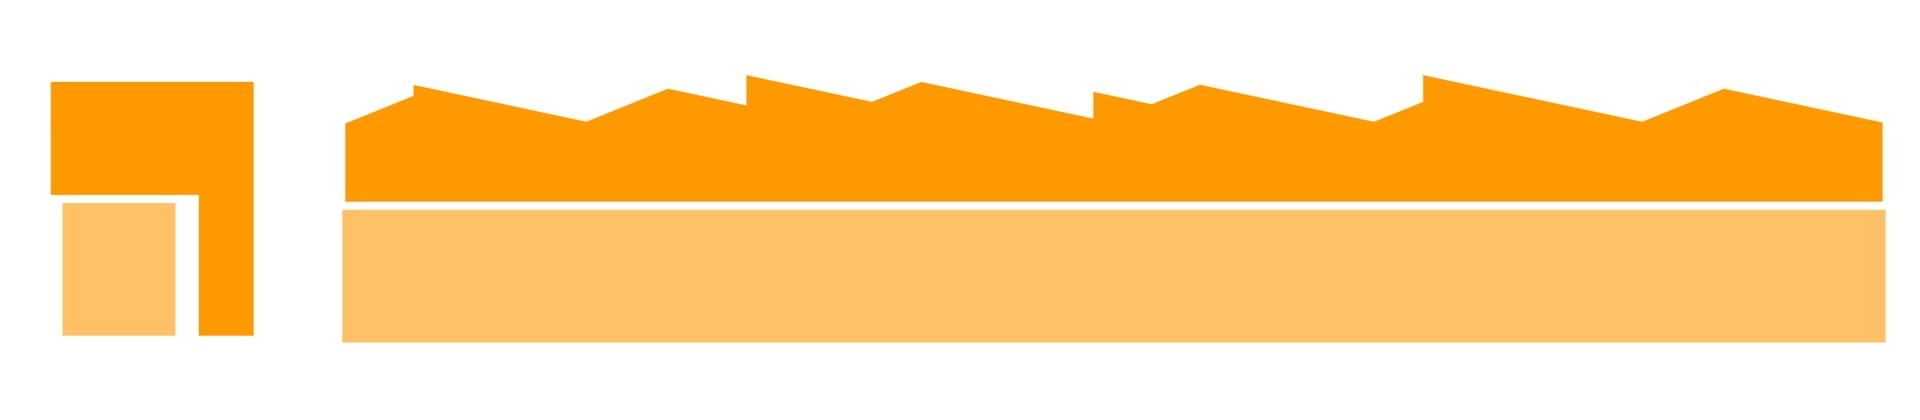 schematic graphic showing the side views of the building in orange